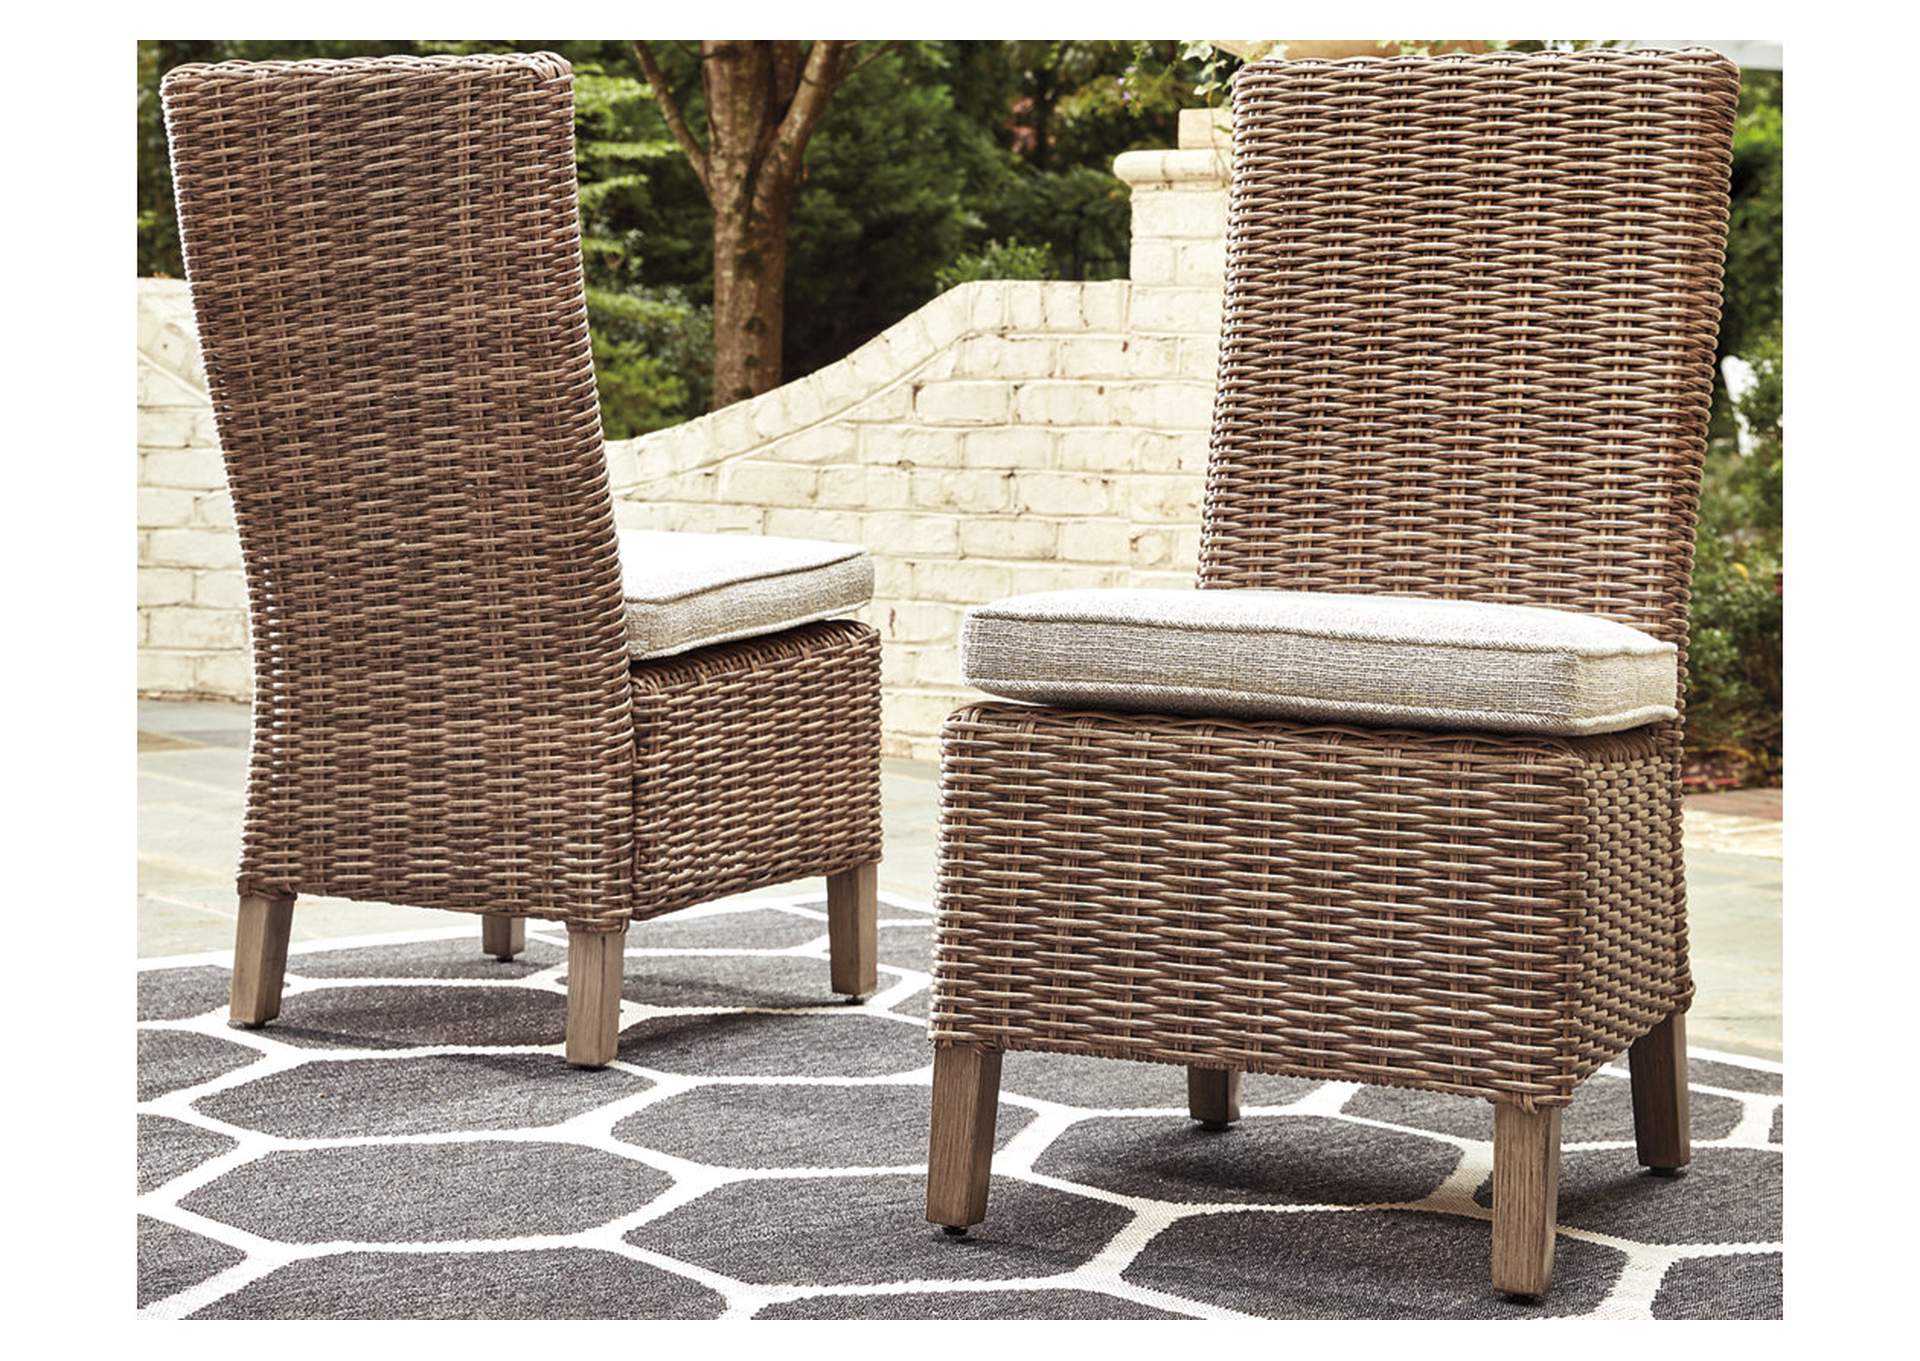 Signature Design by Ashley Beachcroft Outdoor Wicker Dining Chair Set 2 Count Beige 